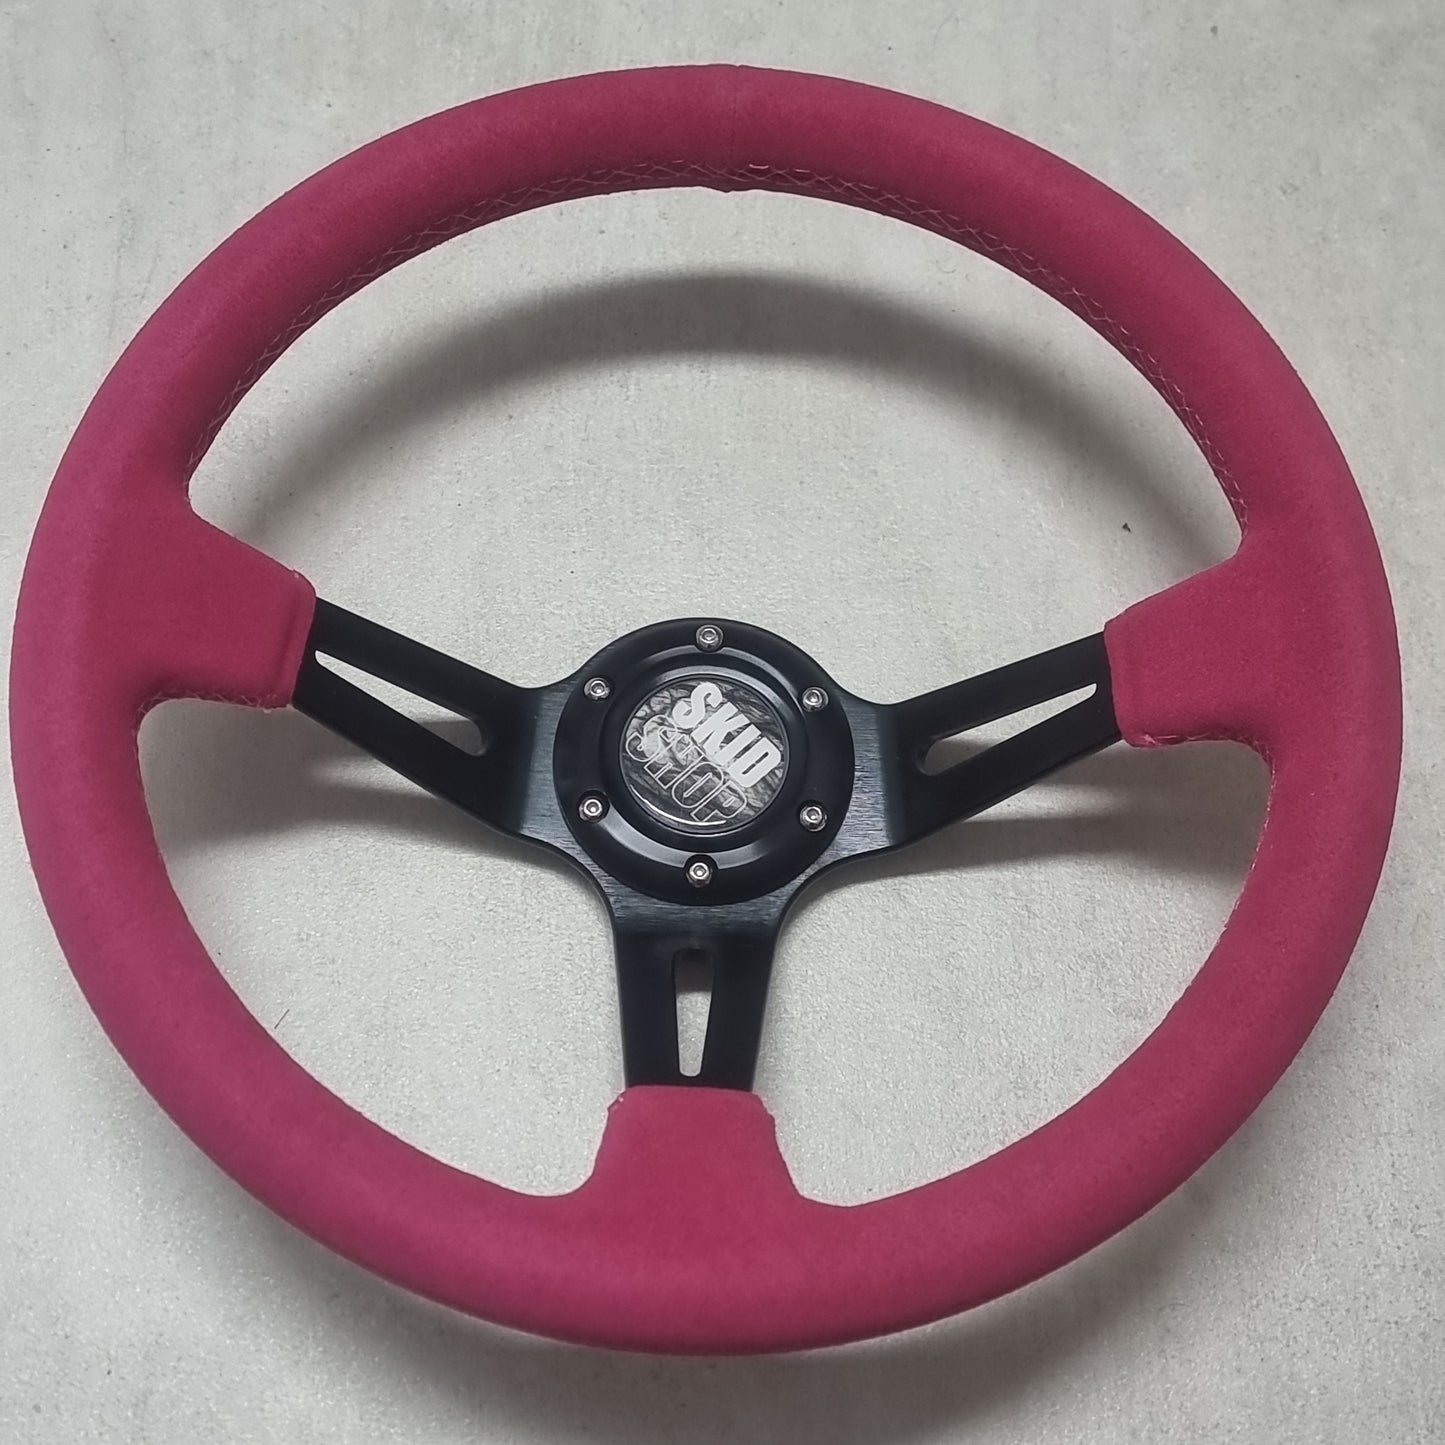 NEW SkidShop deep dish steering wheel - solid colours